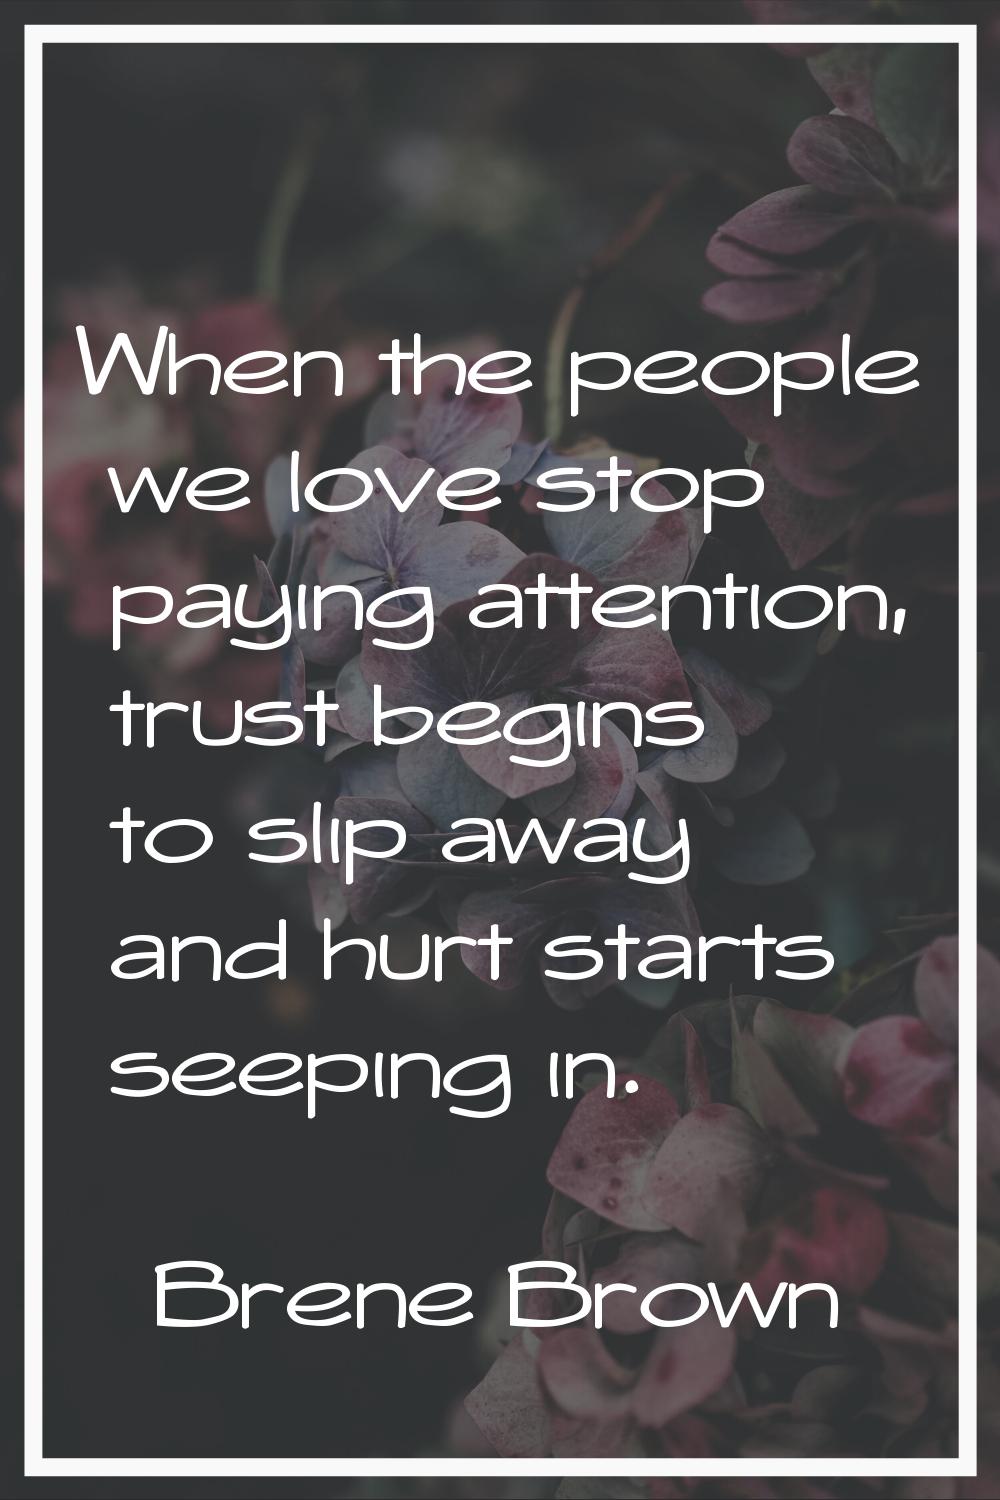 When the people we love stop paying attention, trust begins to slip away and hurt starts seeping in